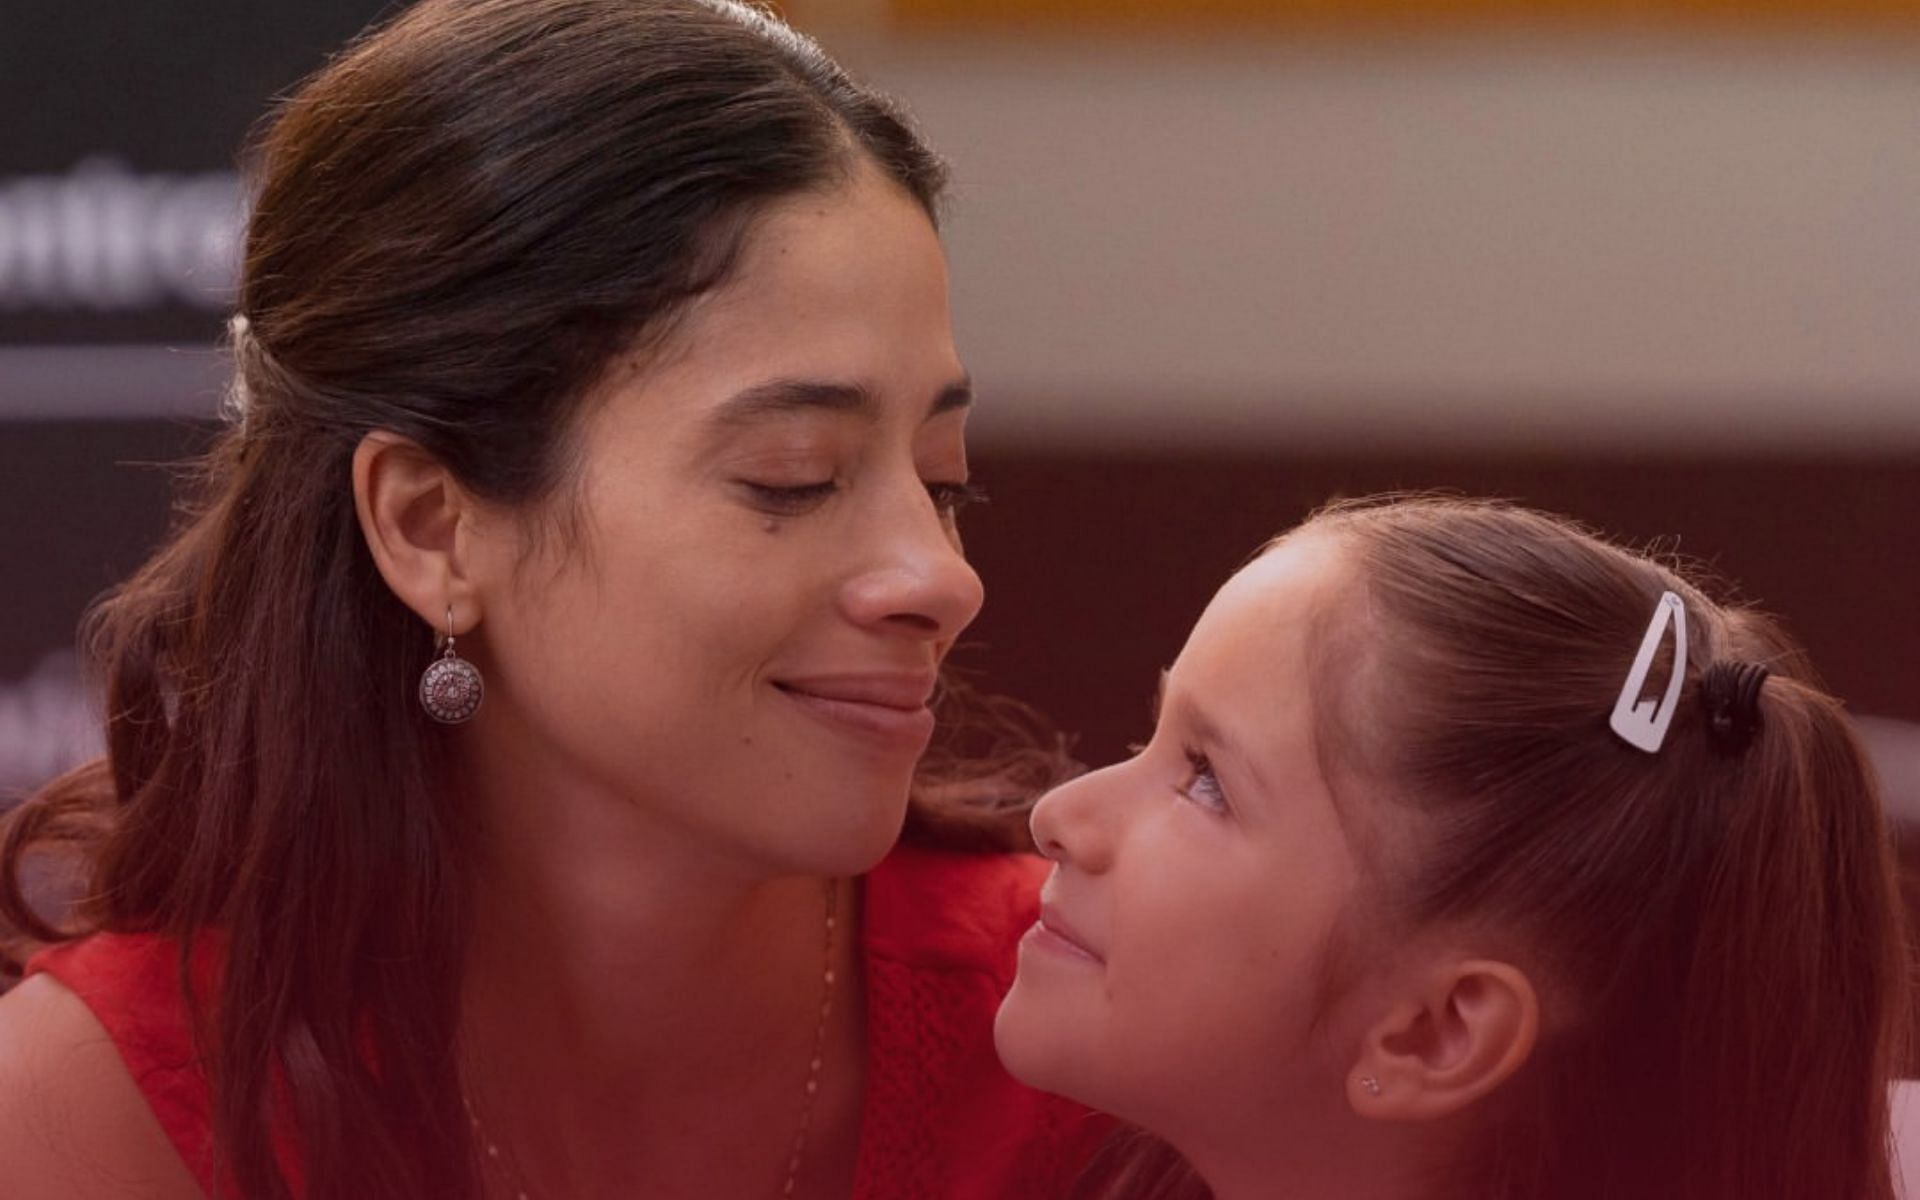 Torn From Her Arms&rsquo; actors who play Cindy Madrid and Alisson Ximena (Image via lifetimetv/ Instagram)